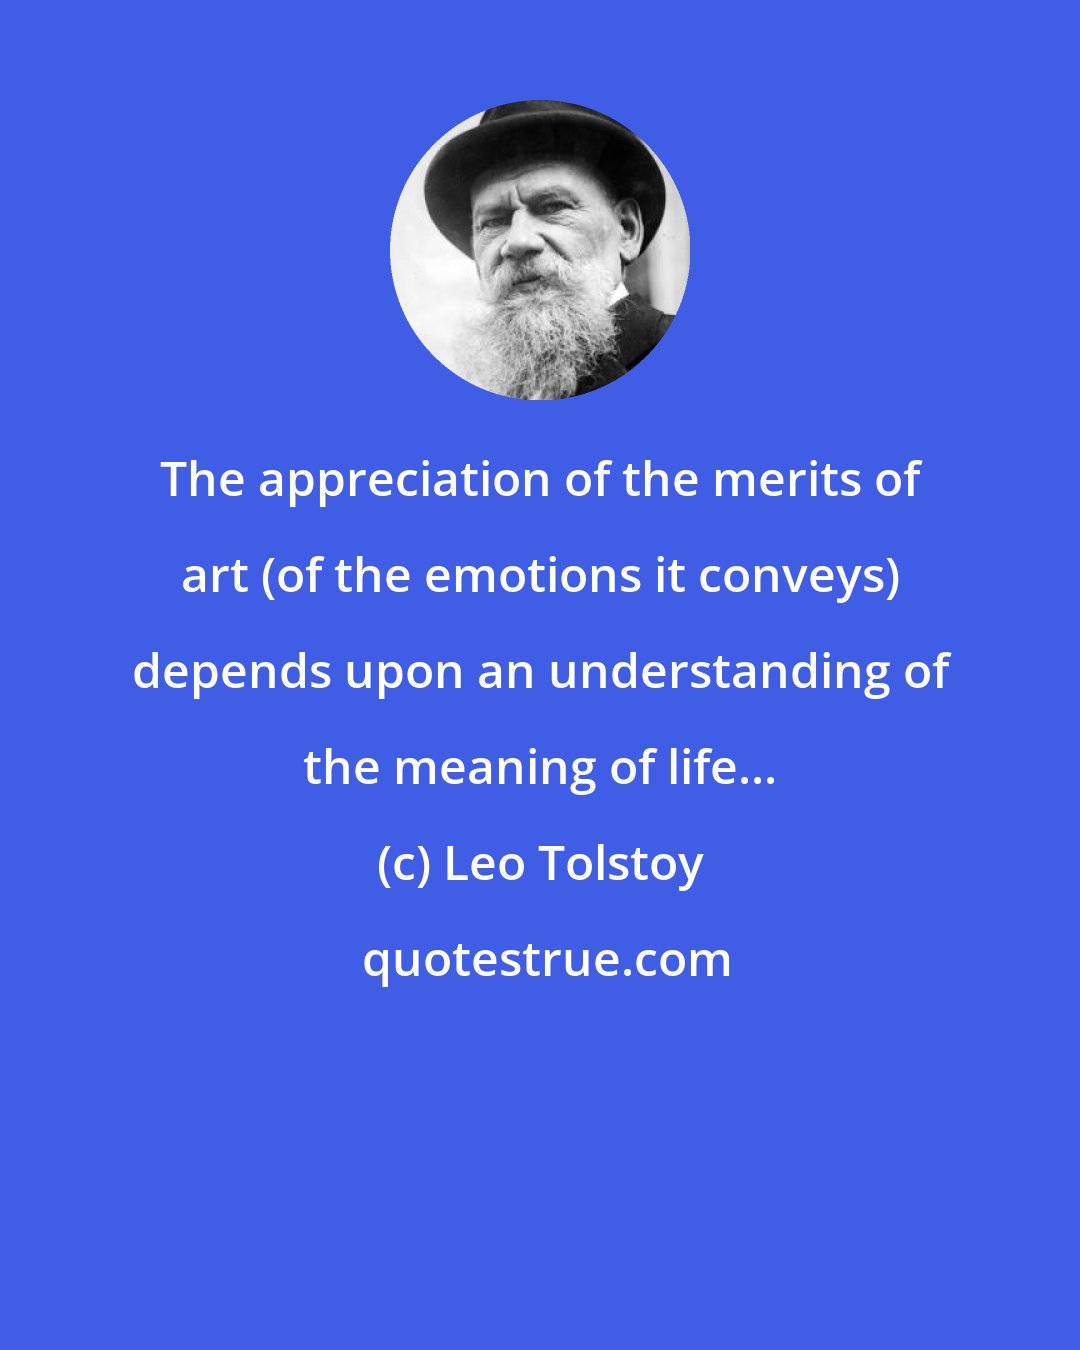 Leo Tolstoy: The appreciation of the merits of art (of the emotions it conveys) depends upon an understanding of the meaning of life...